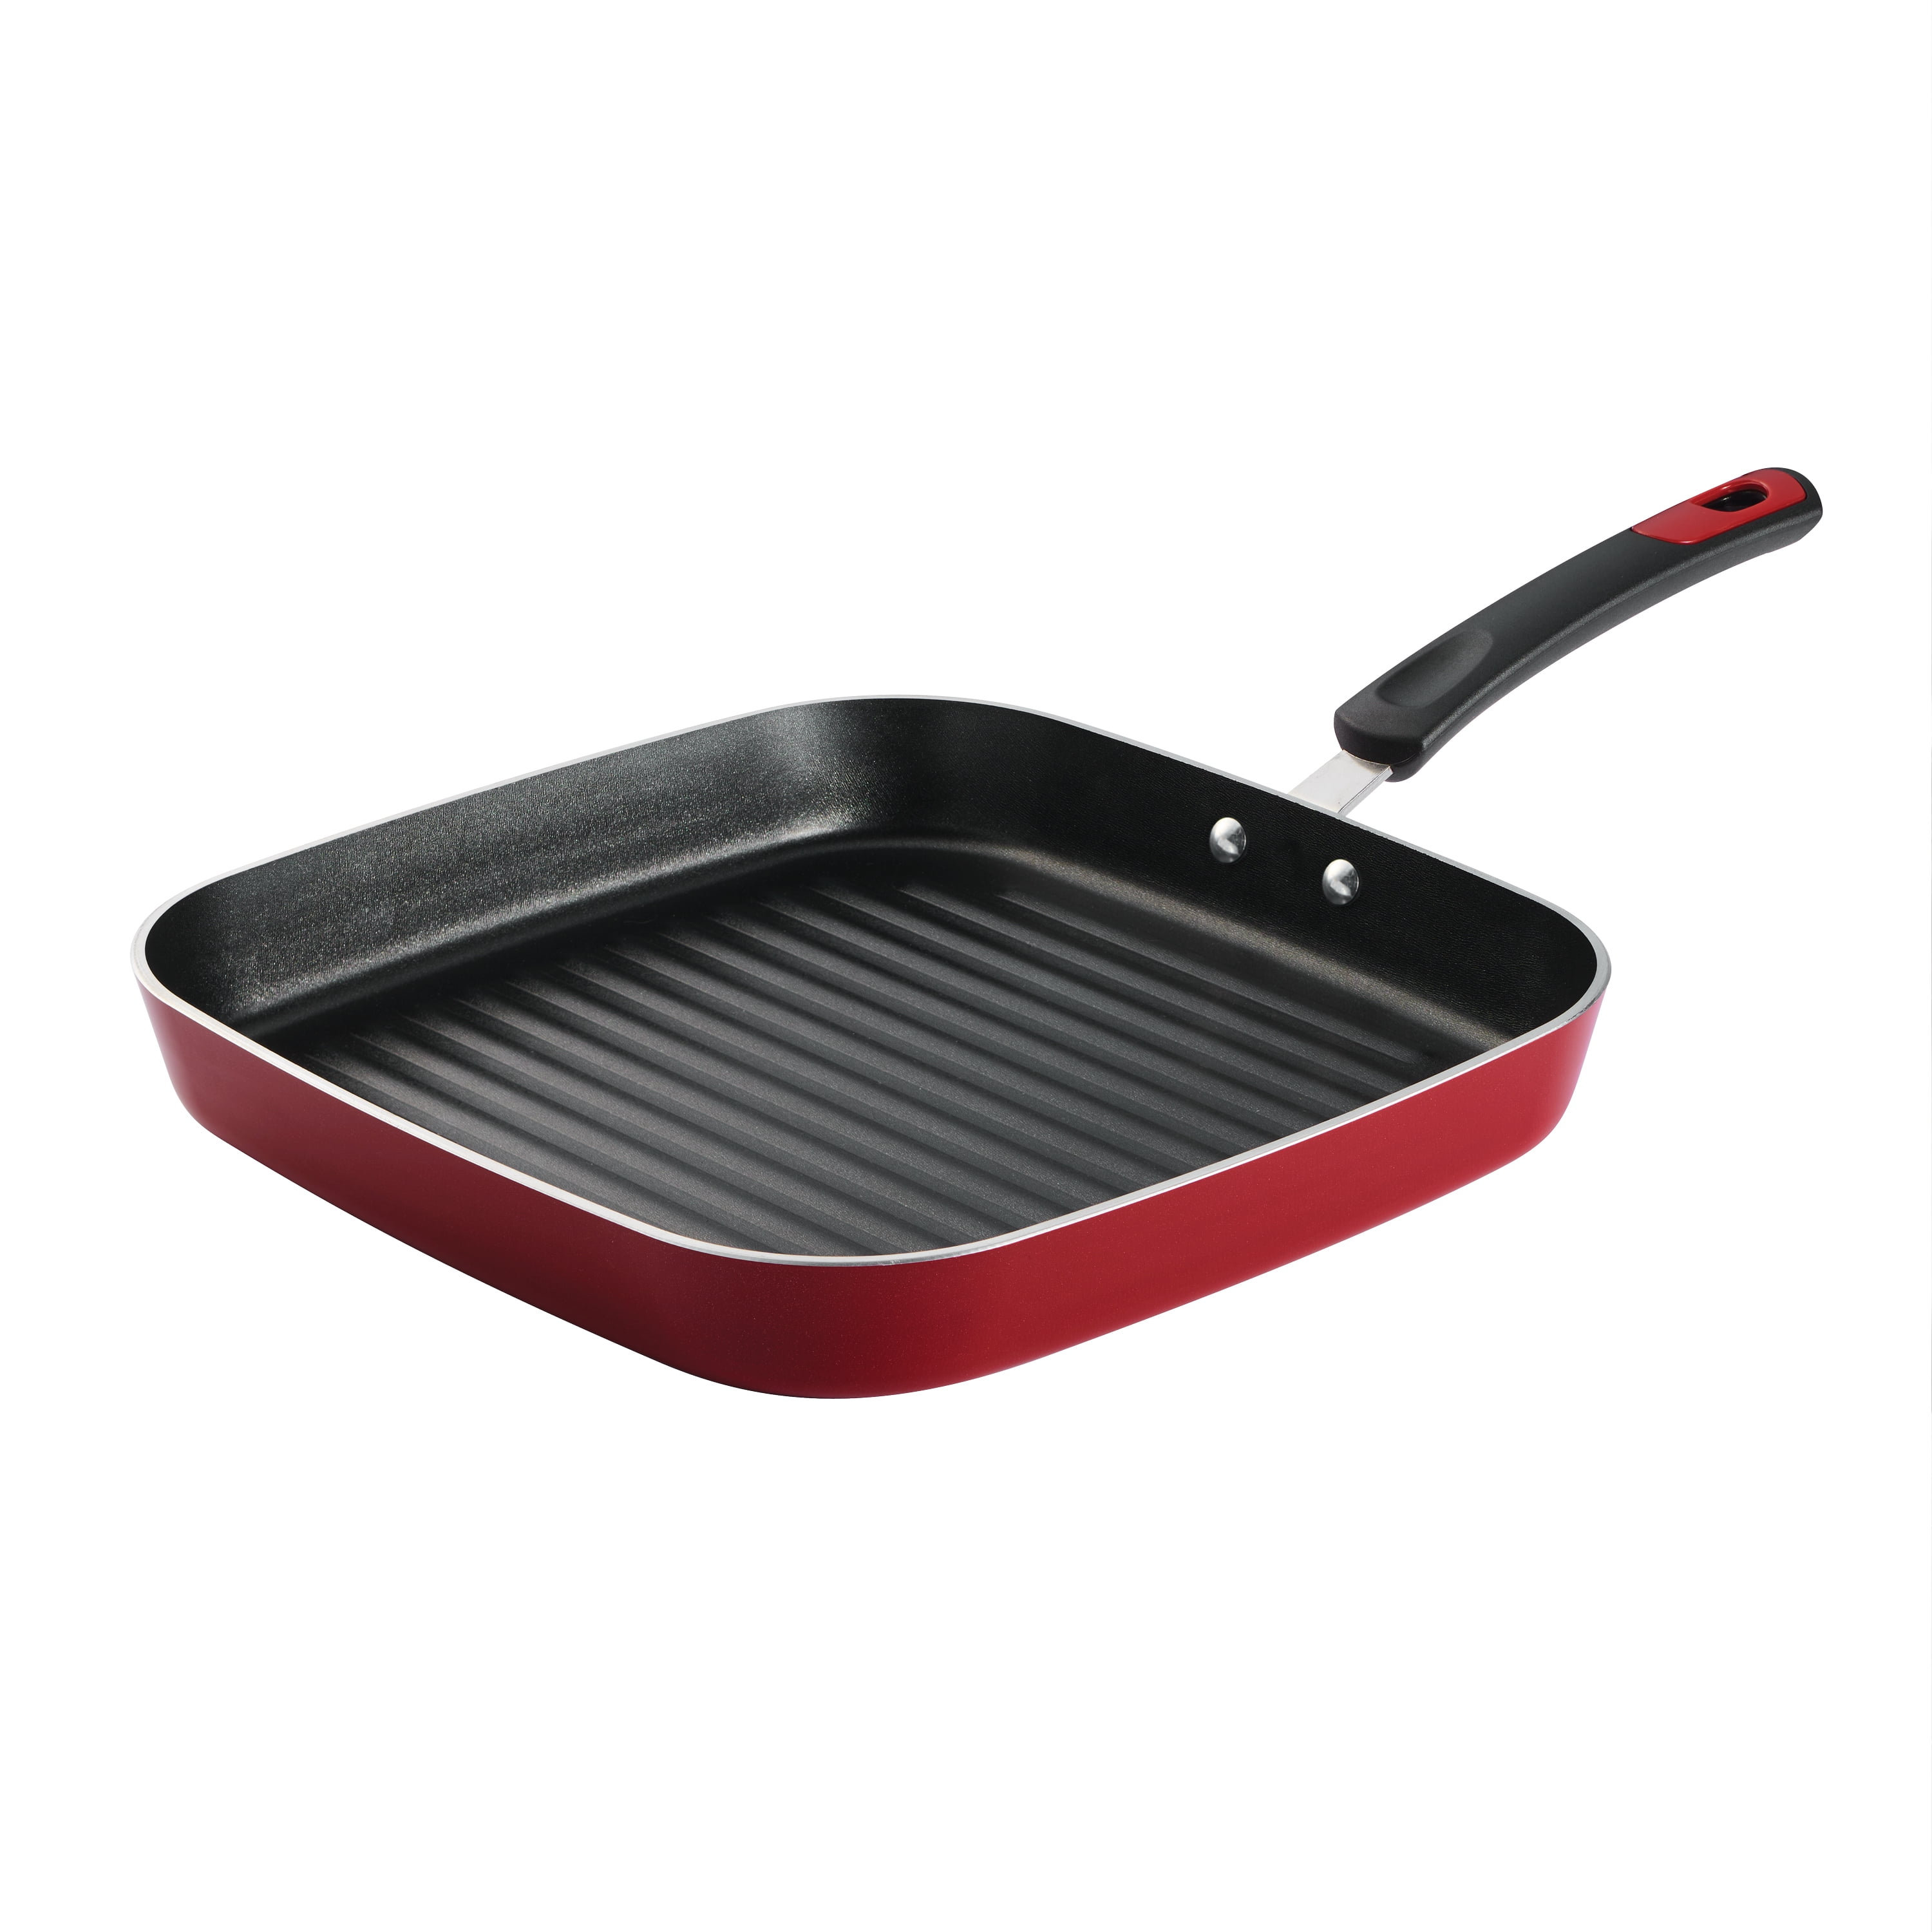 EveryDay 11 in Nonstick Square Grill Pan – Red Walmart.com